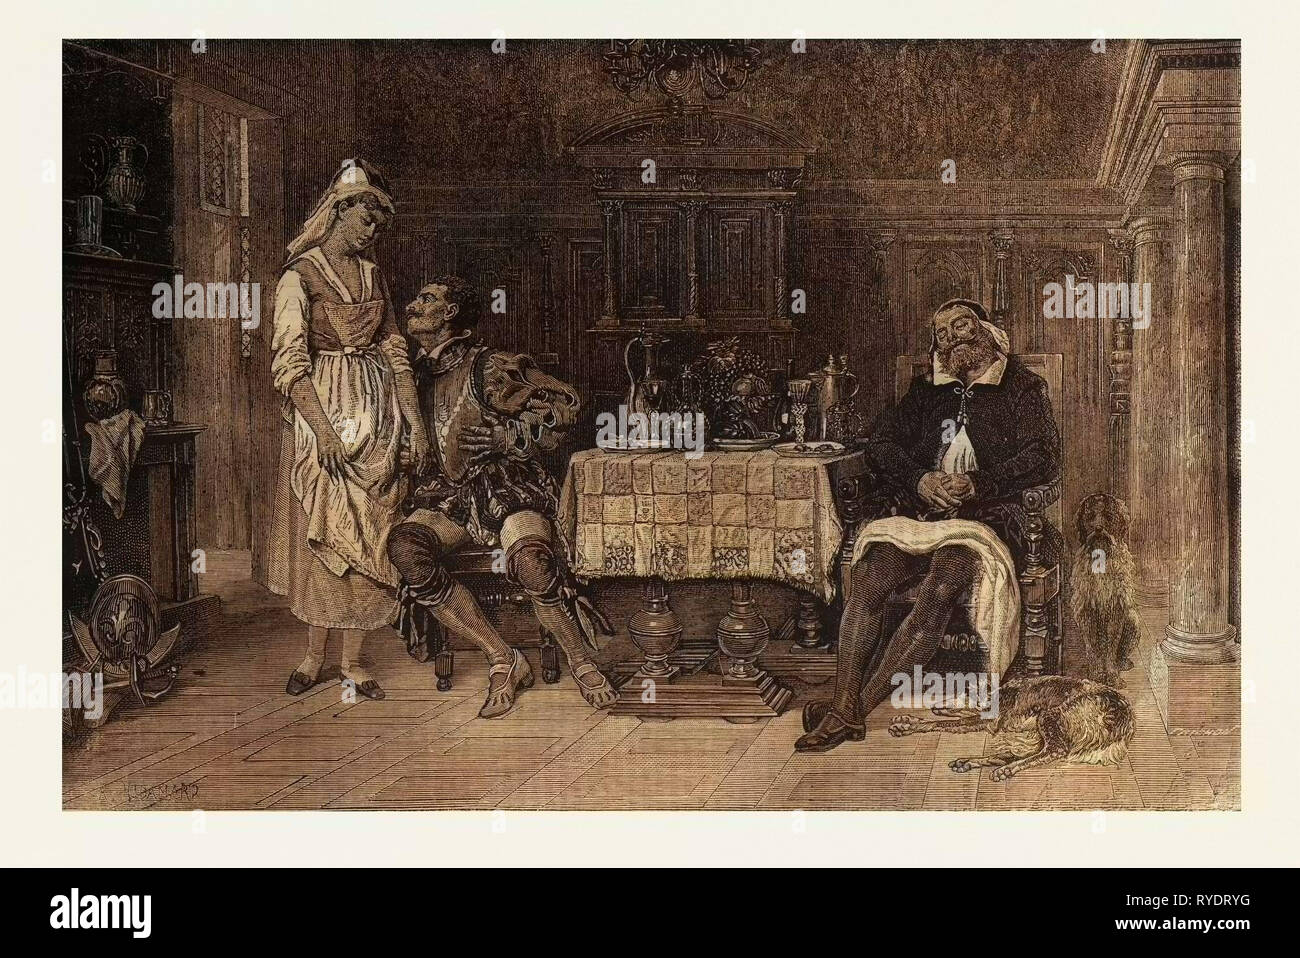 The Good Motive, French, Salon of Beaux Arts, 1880, 19th Century, Liszt Gourmet Archive, Food and Drink, Dinner Table, Carafe, Glass, Glasses, Plates, Men, Servant, Woman, Dog, Dining Room Stock Photo